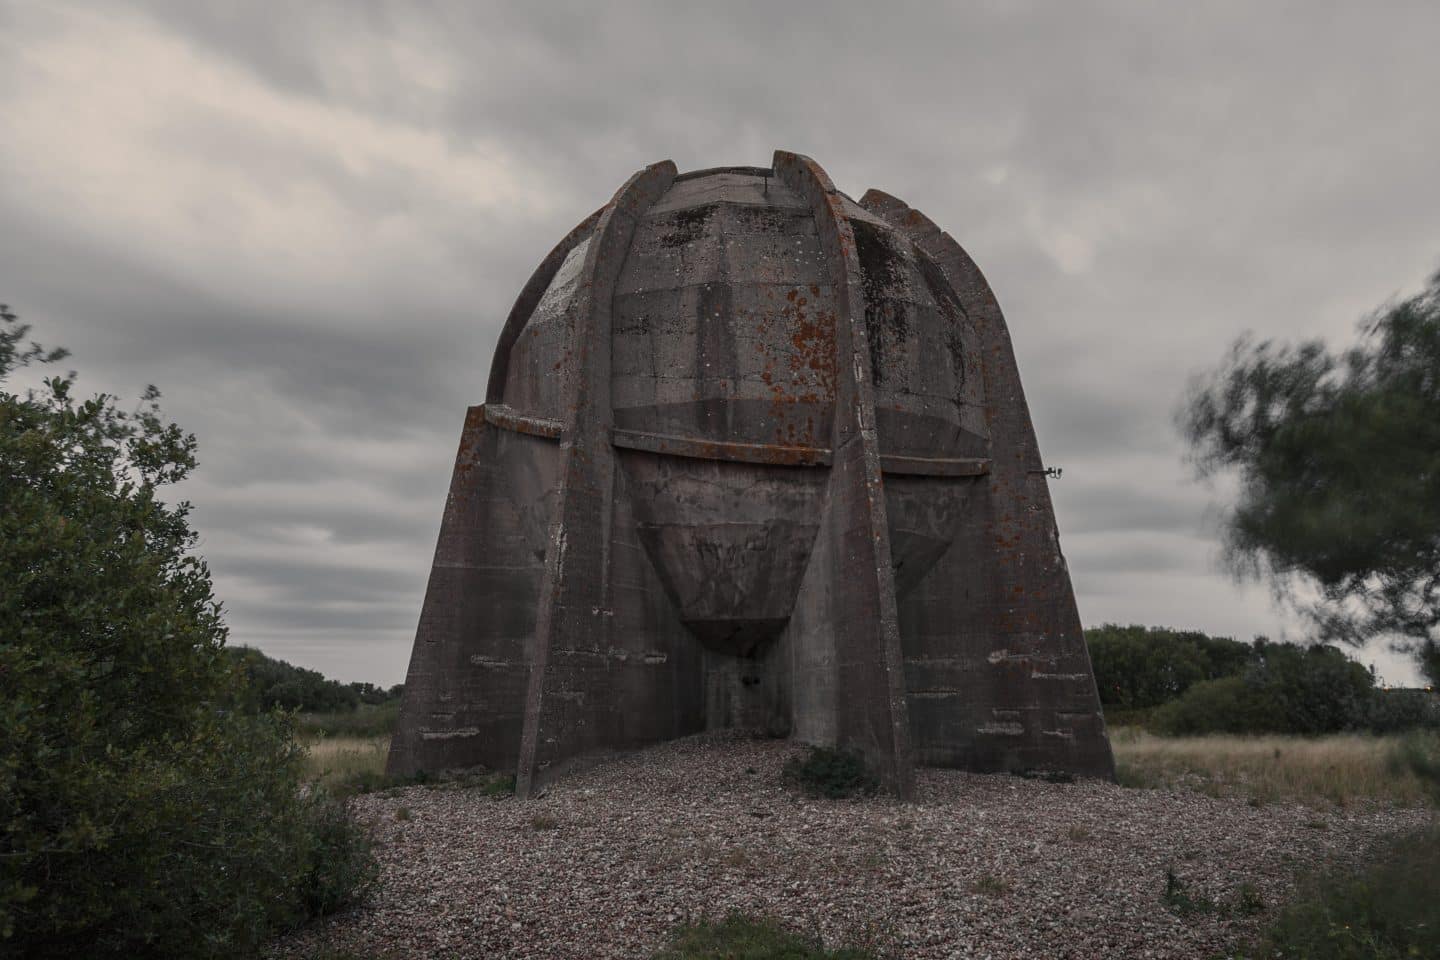 Charles Stankievech, Monument as Ruin (Earth), 2011, photograph Courtesy of Charles Stankievech